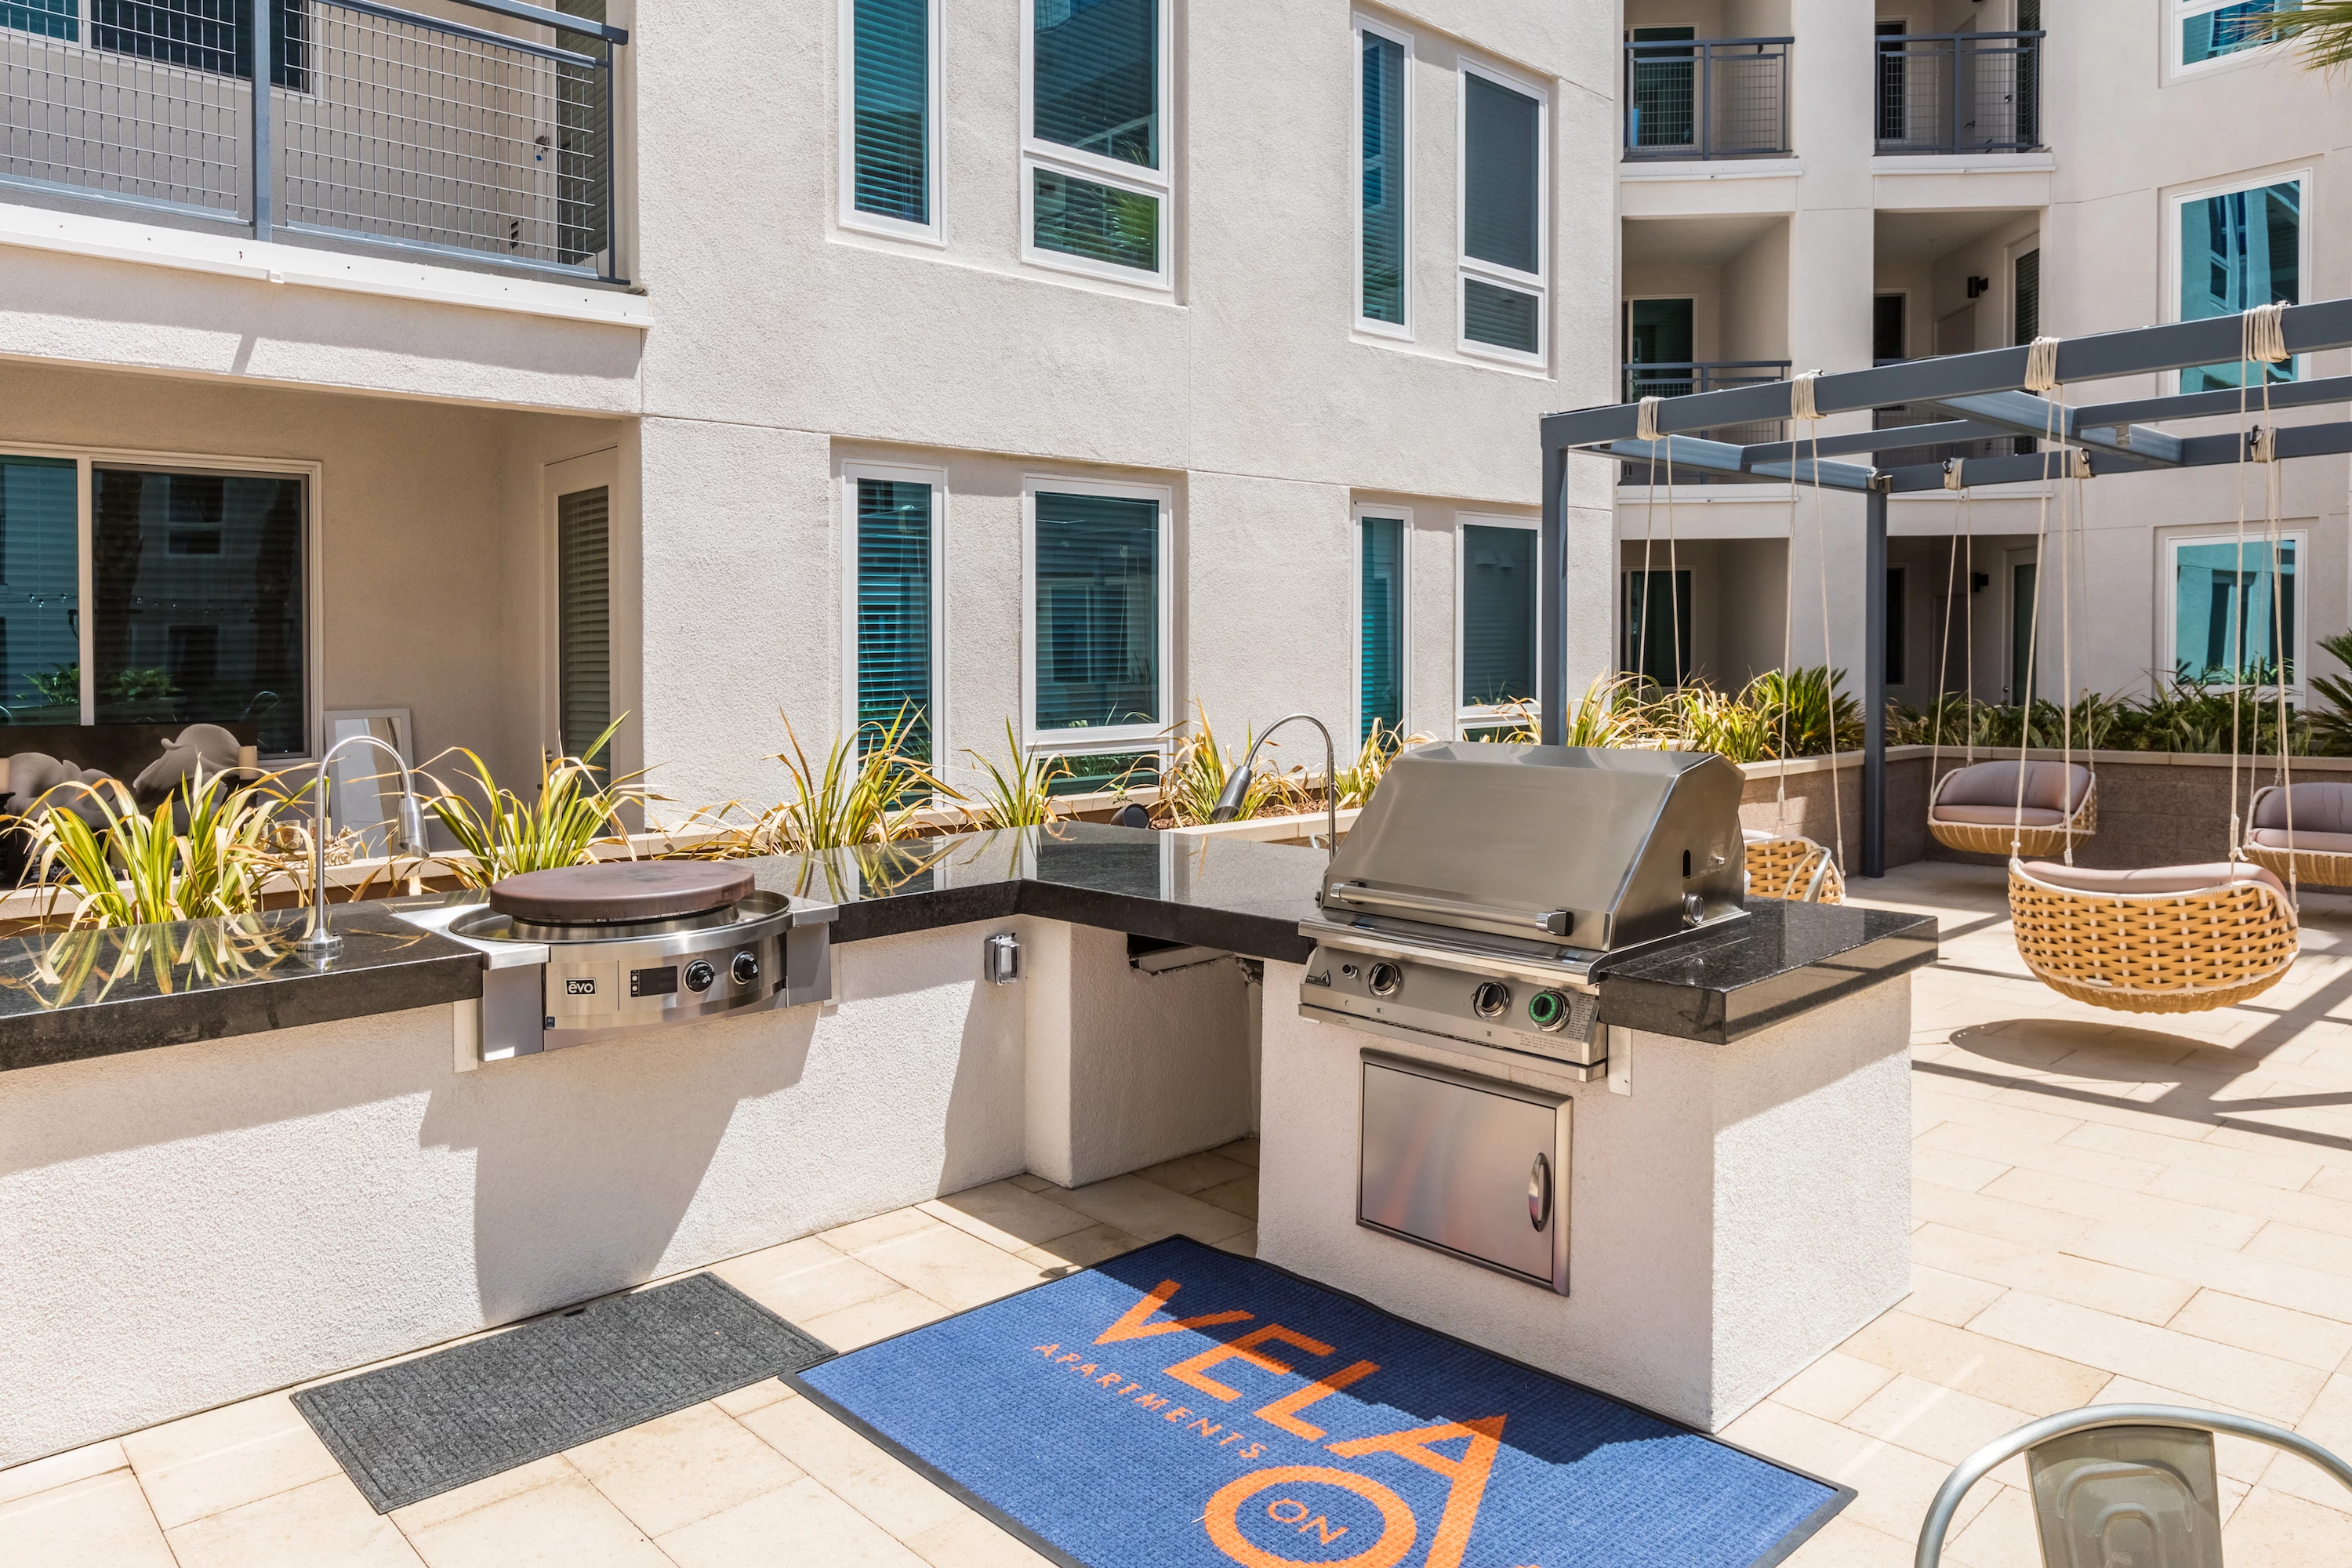 1251-12-exterior-courtyard-barbecue-and-evo-grill-at-vela-on-ox-apartments-in-woodlan.jpg